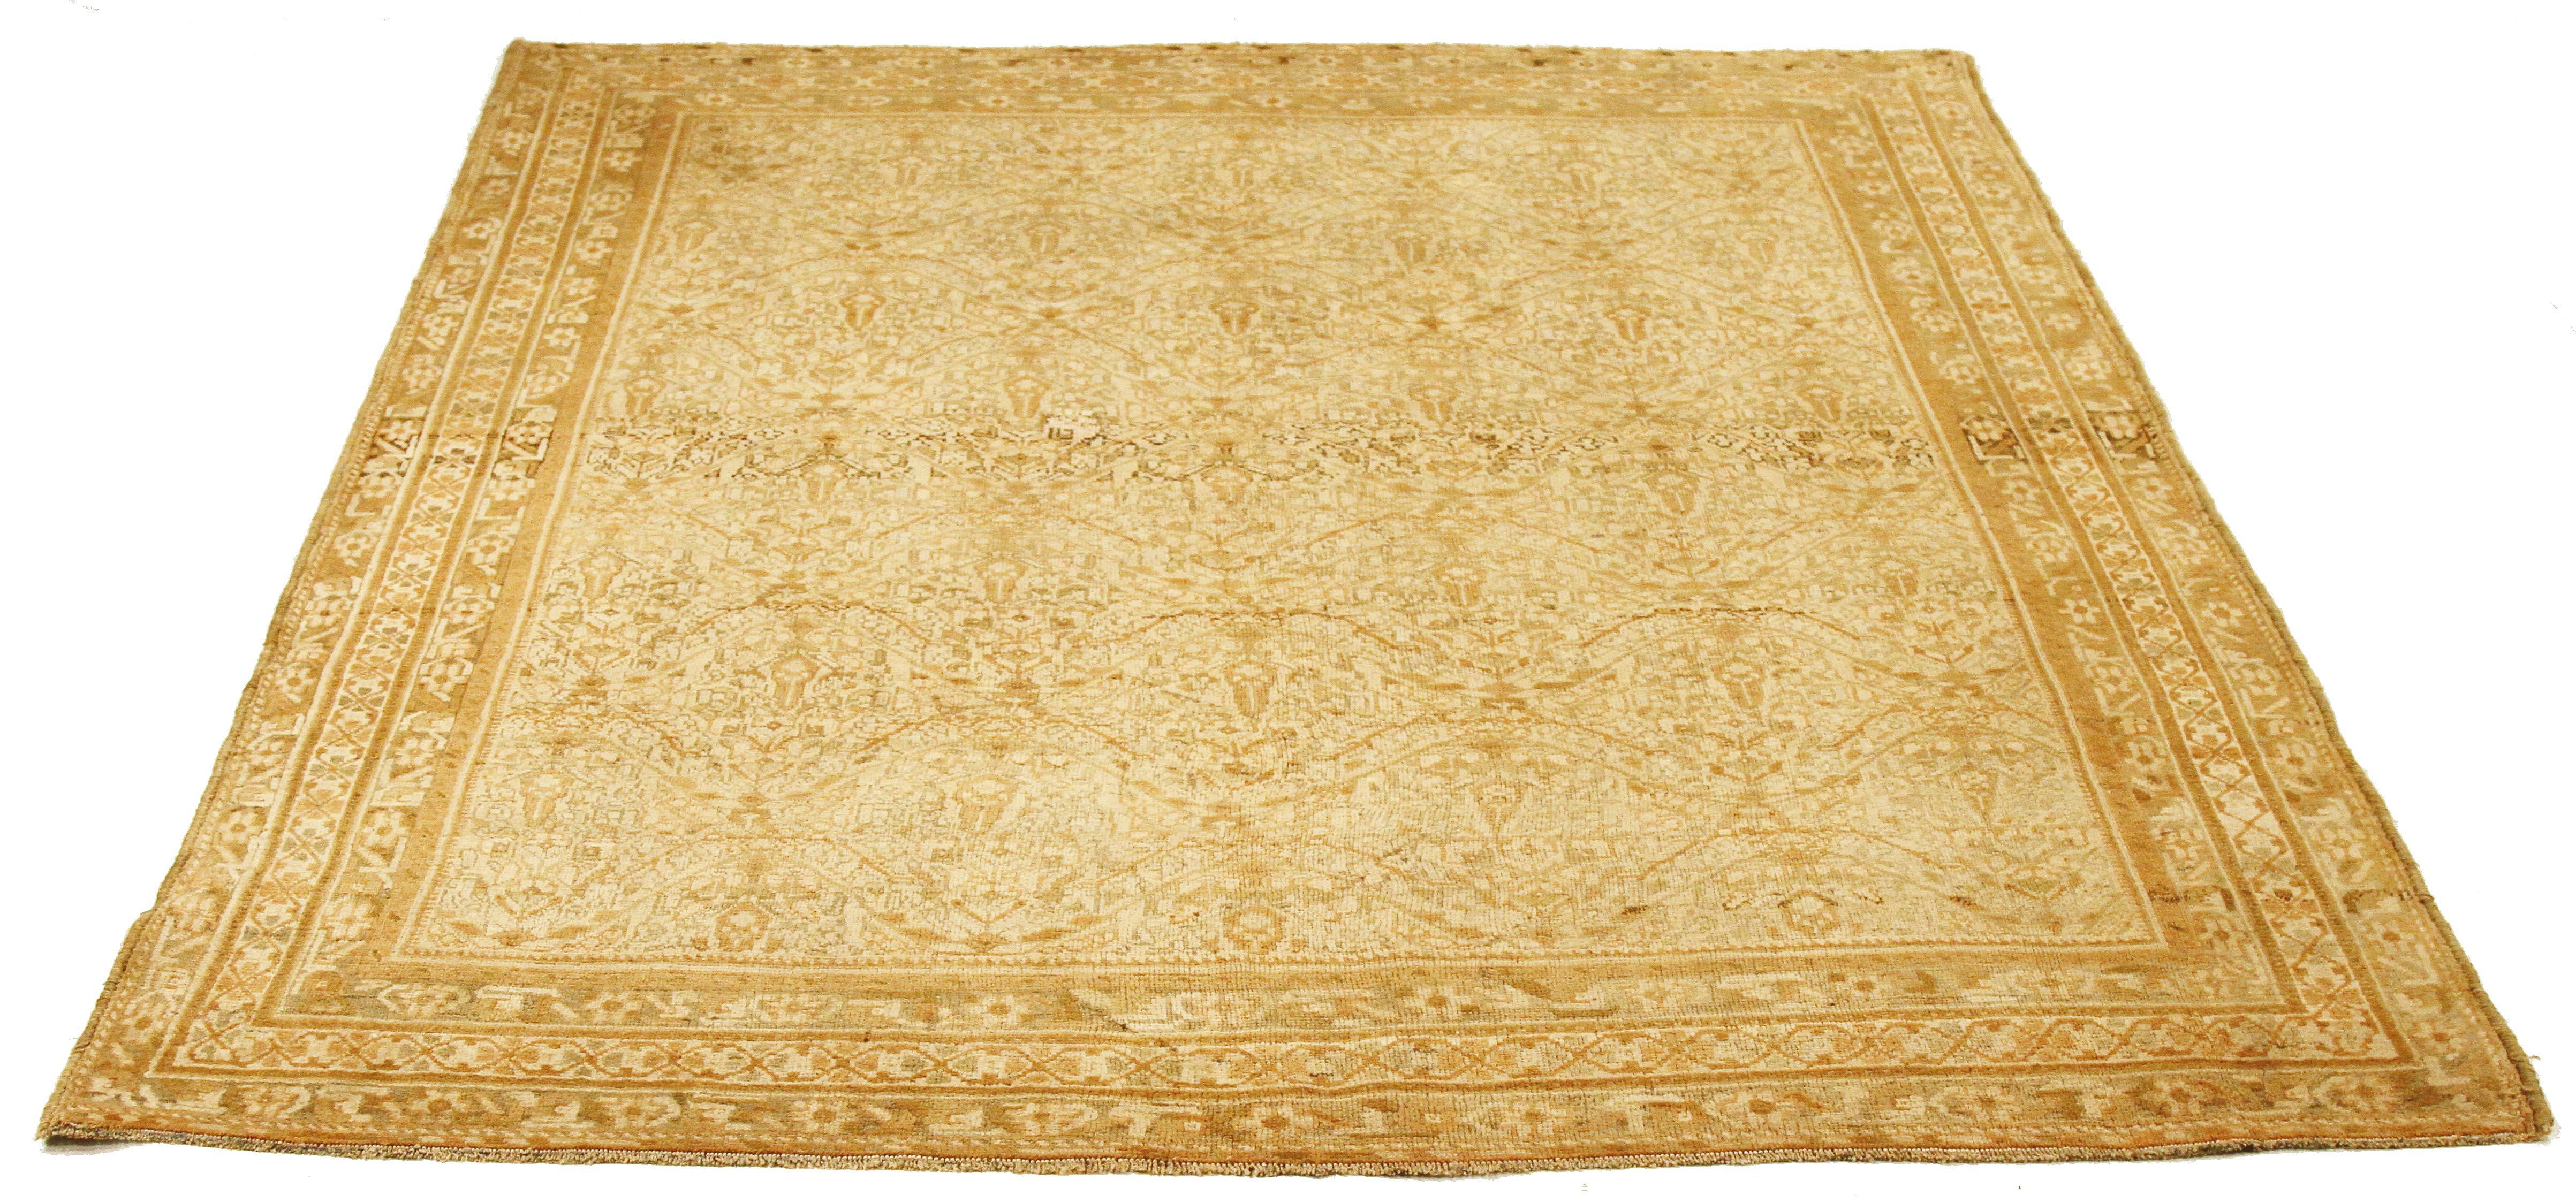 Antique Persian Sirjan rug handwoven from the finest sheep’s wool and colored with all-natural vegetable dyes that are safe for humans and pets. It’s a traditional Sirjan design featuring black and beige botanical details all-over an ivory field.